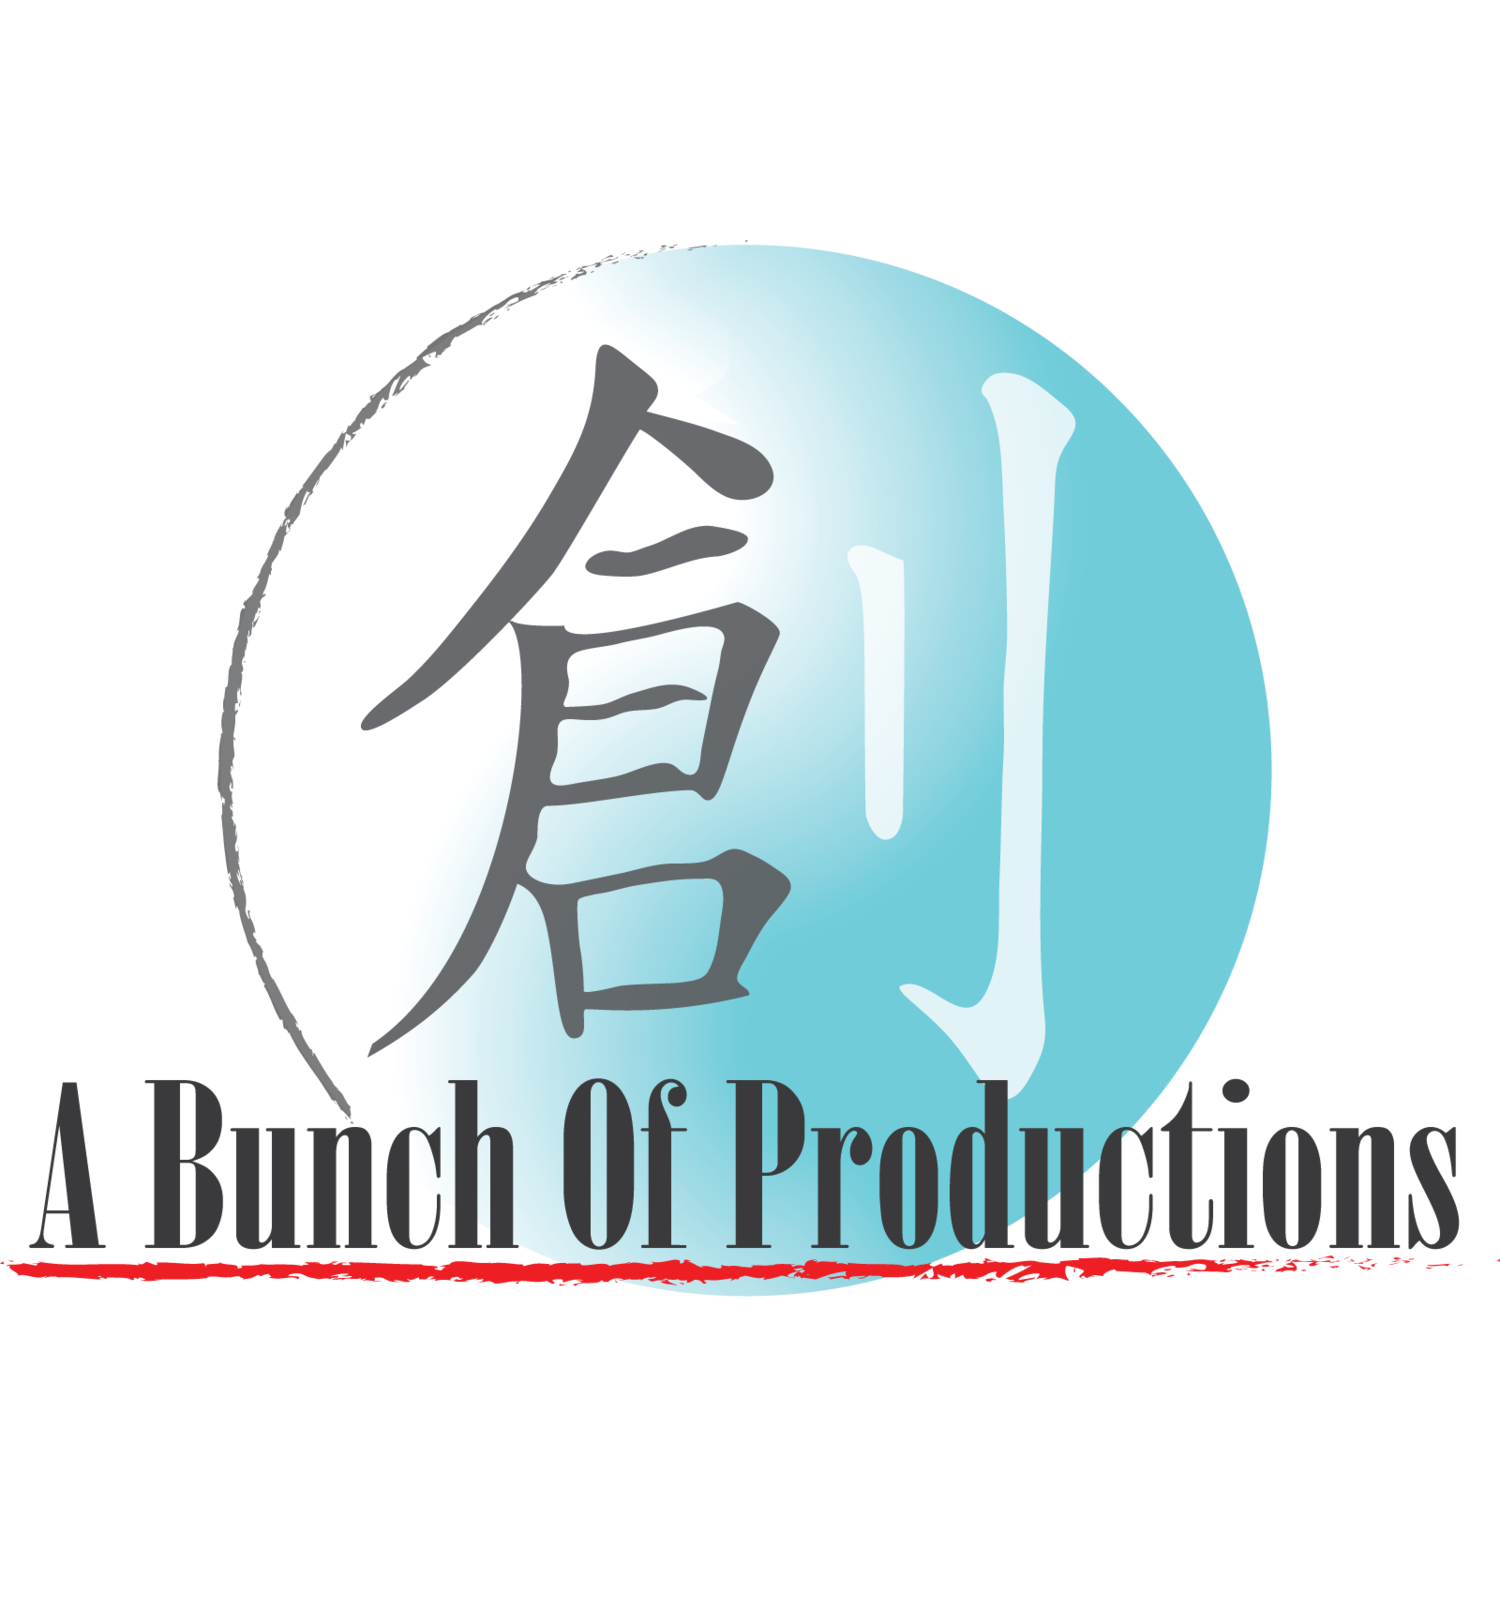 A Bunch of Productions